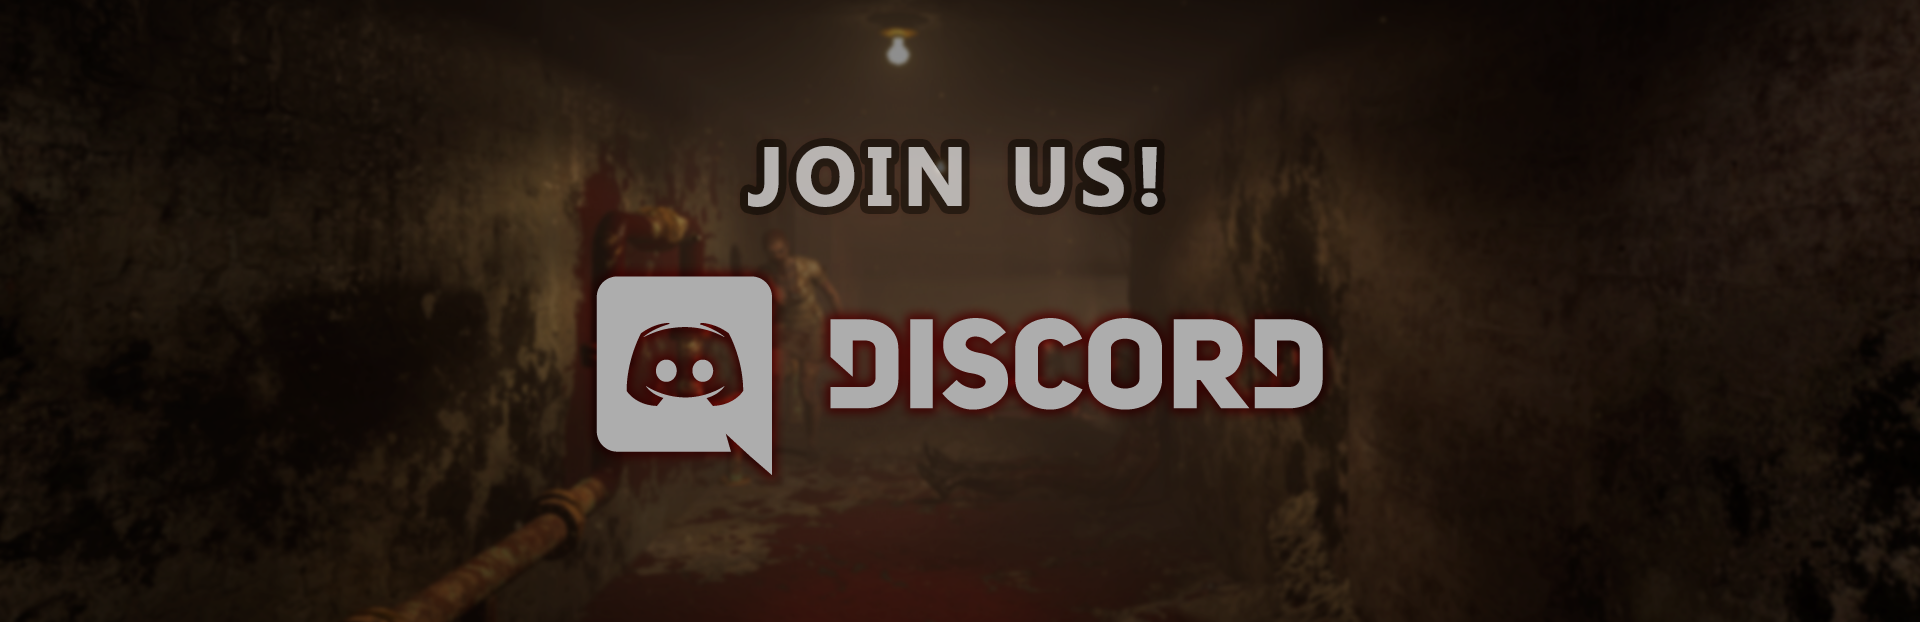 Join our Discord Server